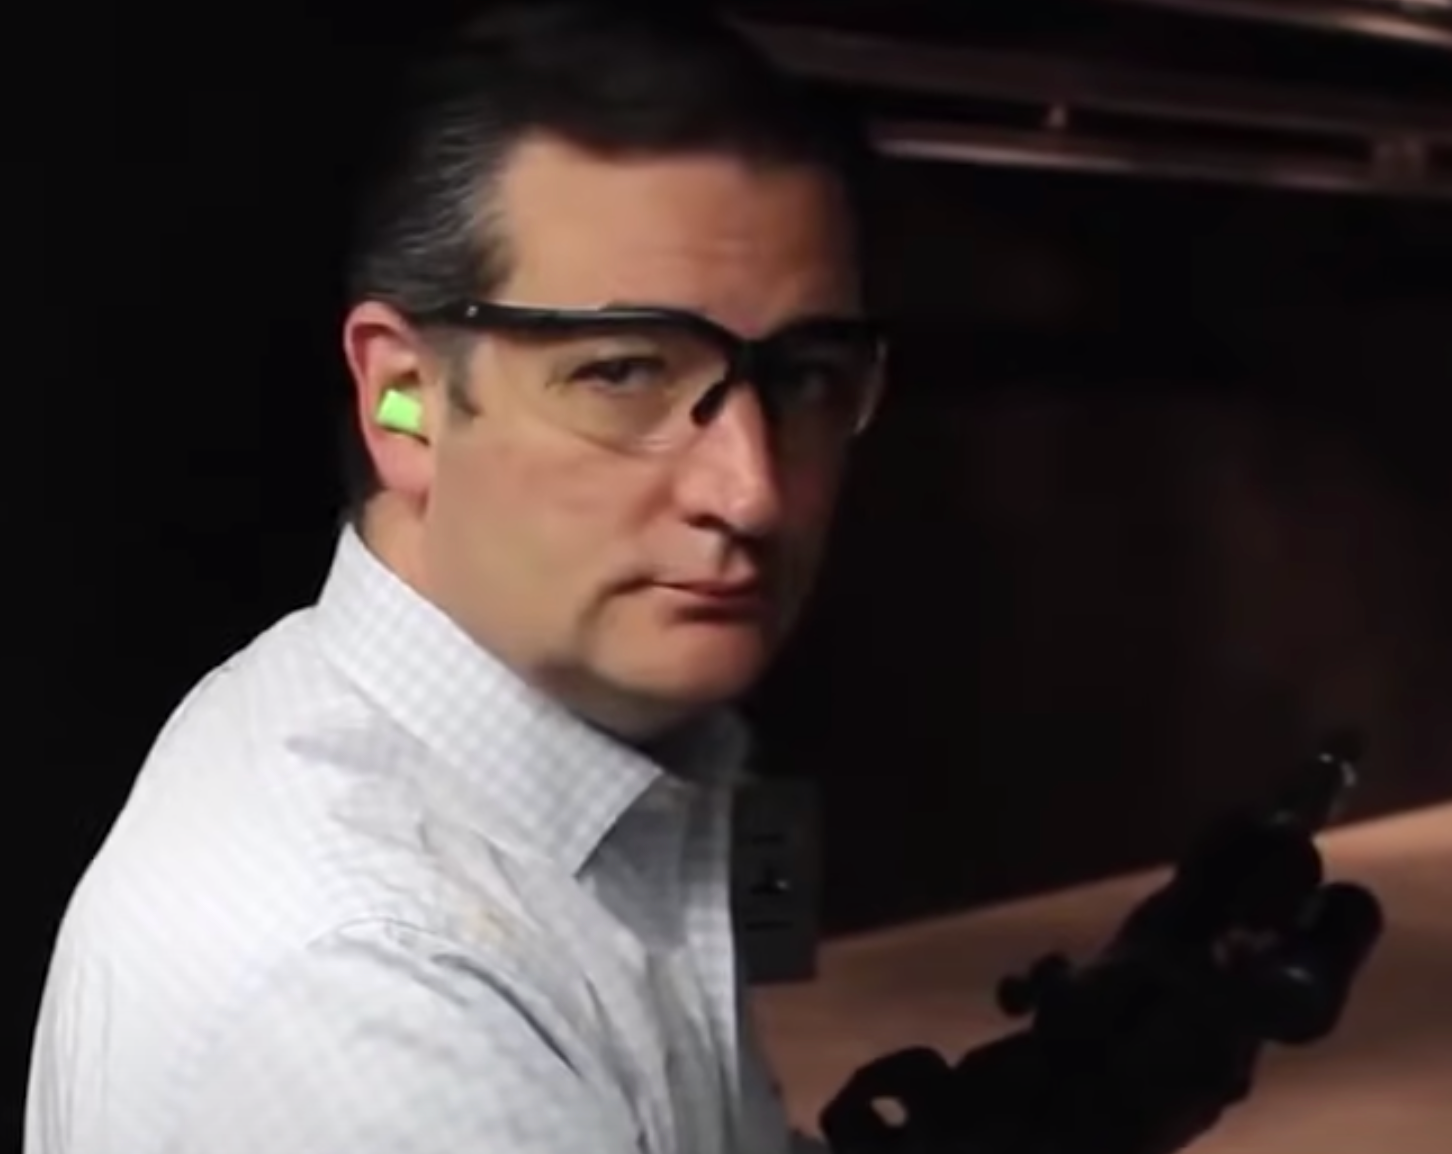 When Senator Ted Cruz began seeking the Republican nomination for president, he famously wrapped slices of bacon around the muzzle of an AR-15 to use its heat as a means of cooking the bacon